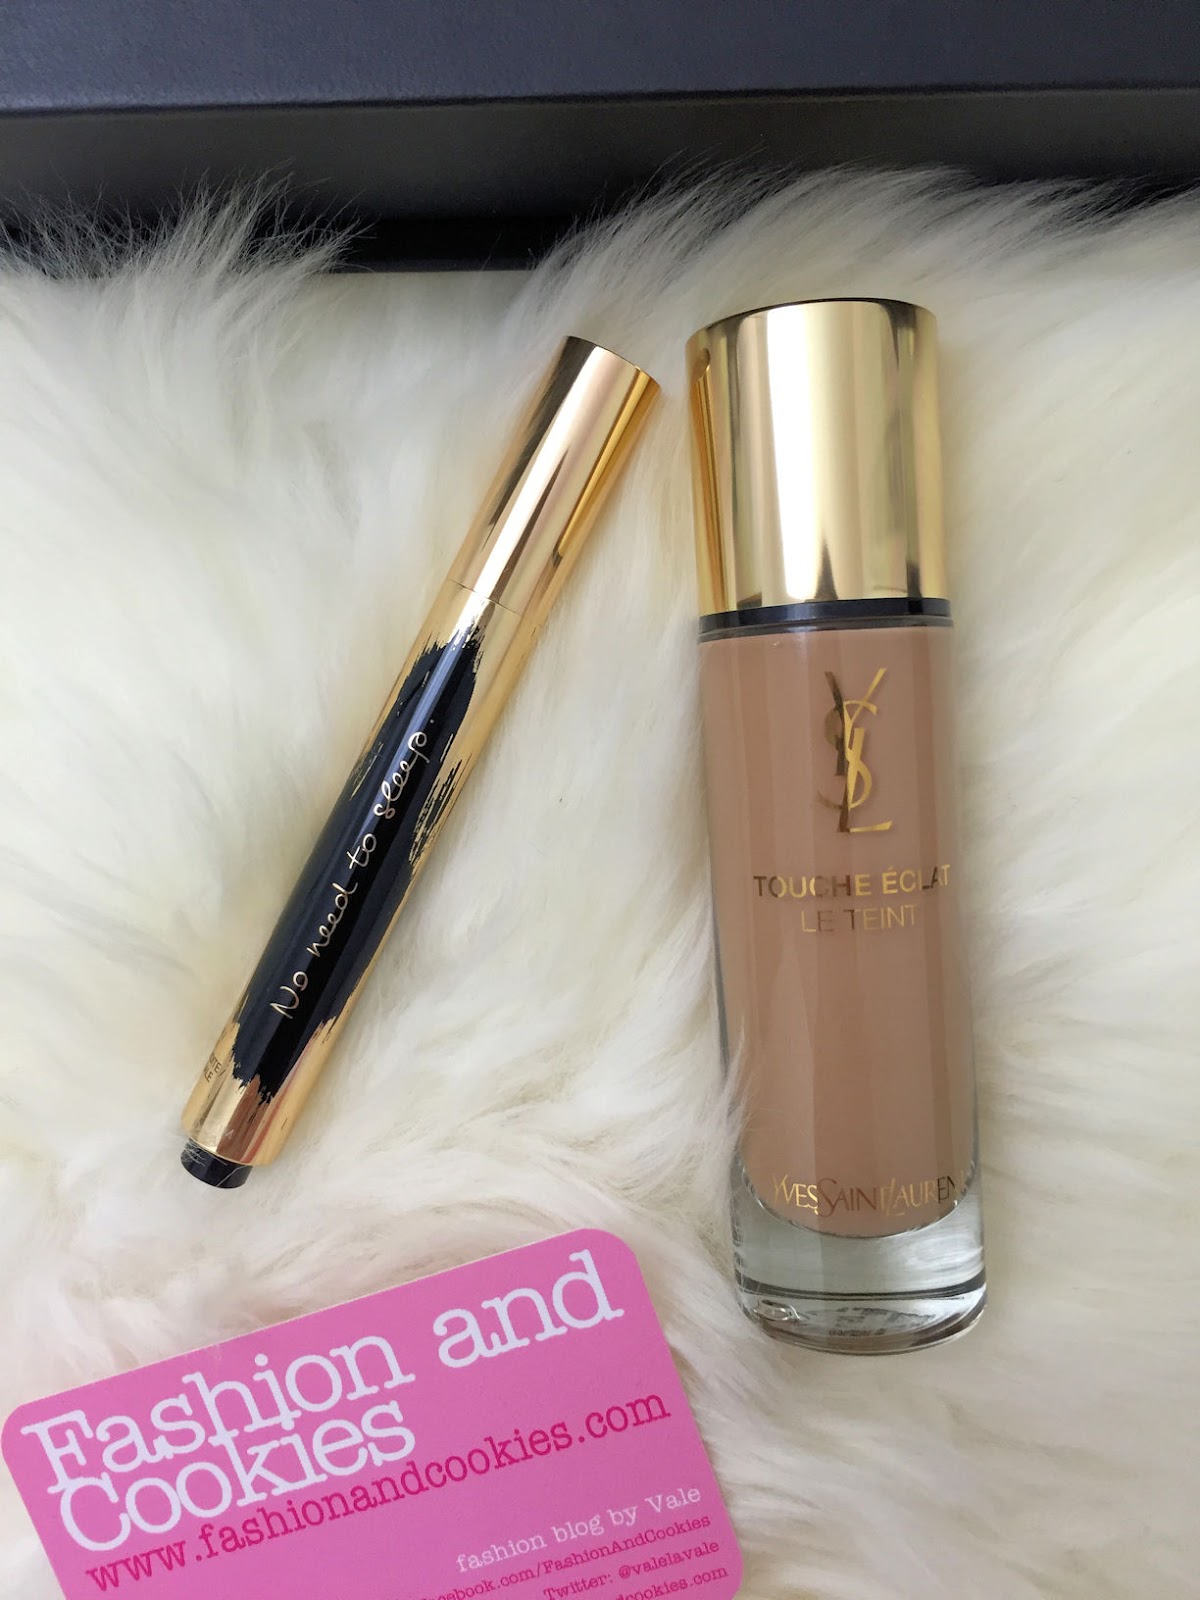 Touche Éclat Le Teint foundation and YSL Touche Éclat collector slogan edition on Fashion and Cookies beauty blog, beauty blogger